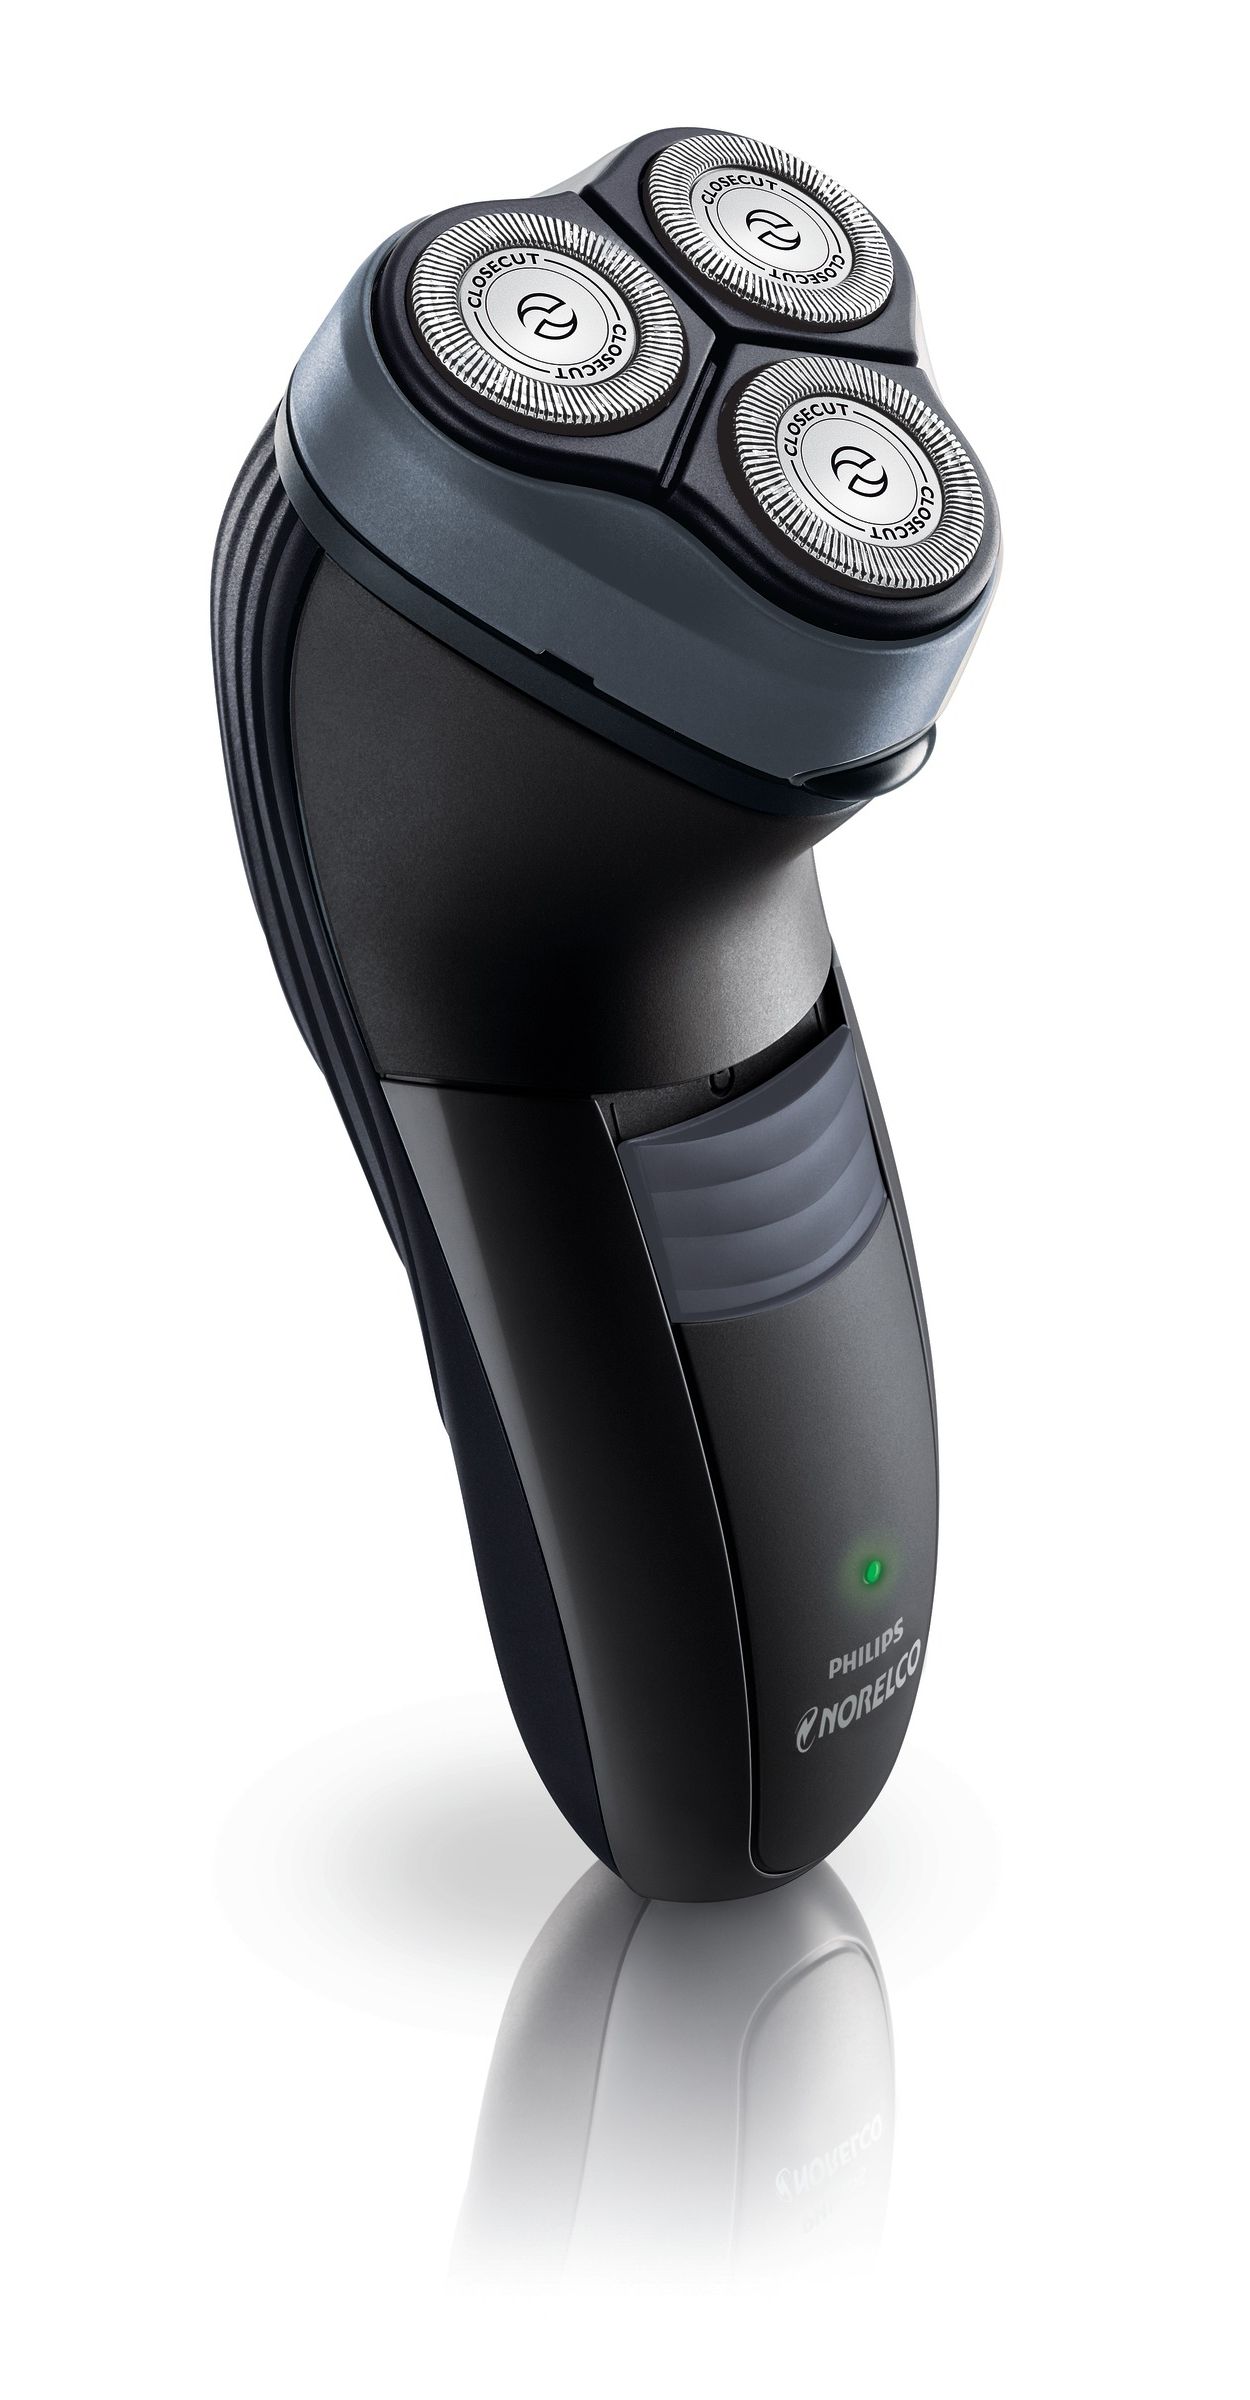 Shaver 2100 Dry electric shaver, Series 2000 6945XL/41 | Norelco